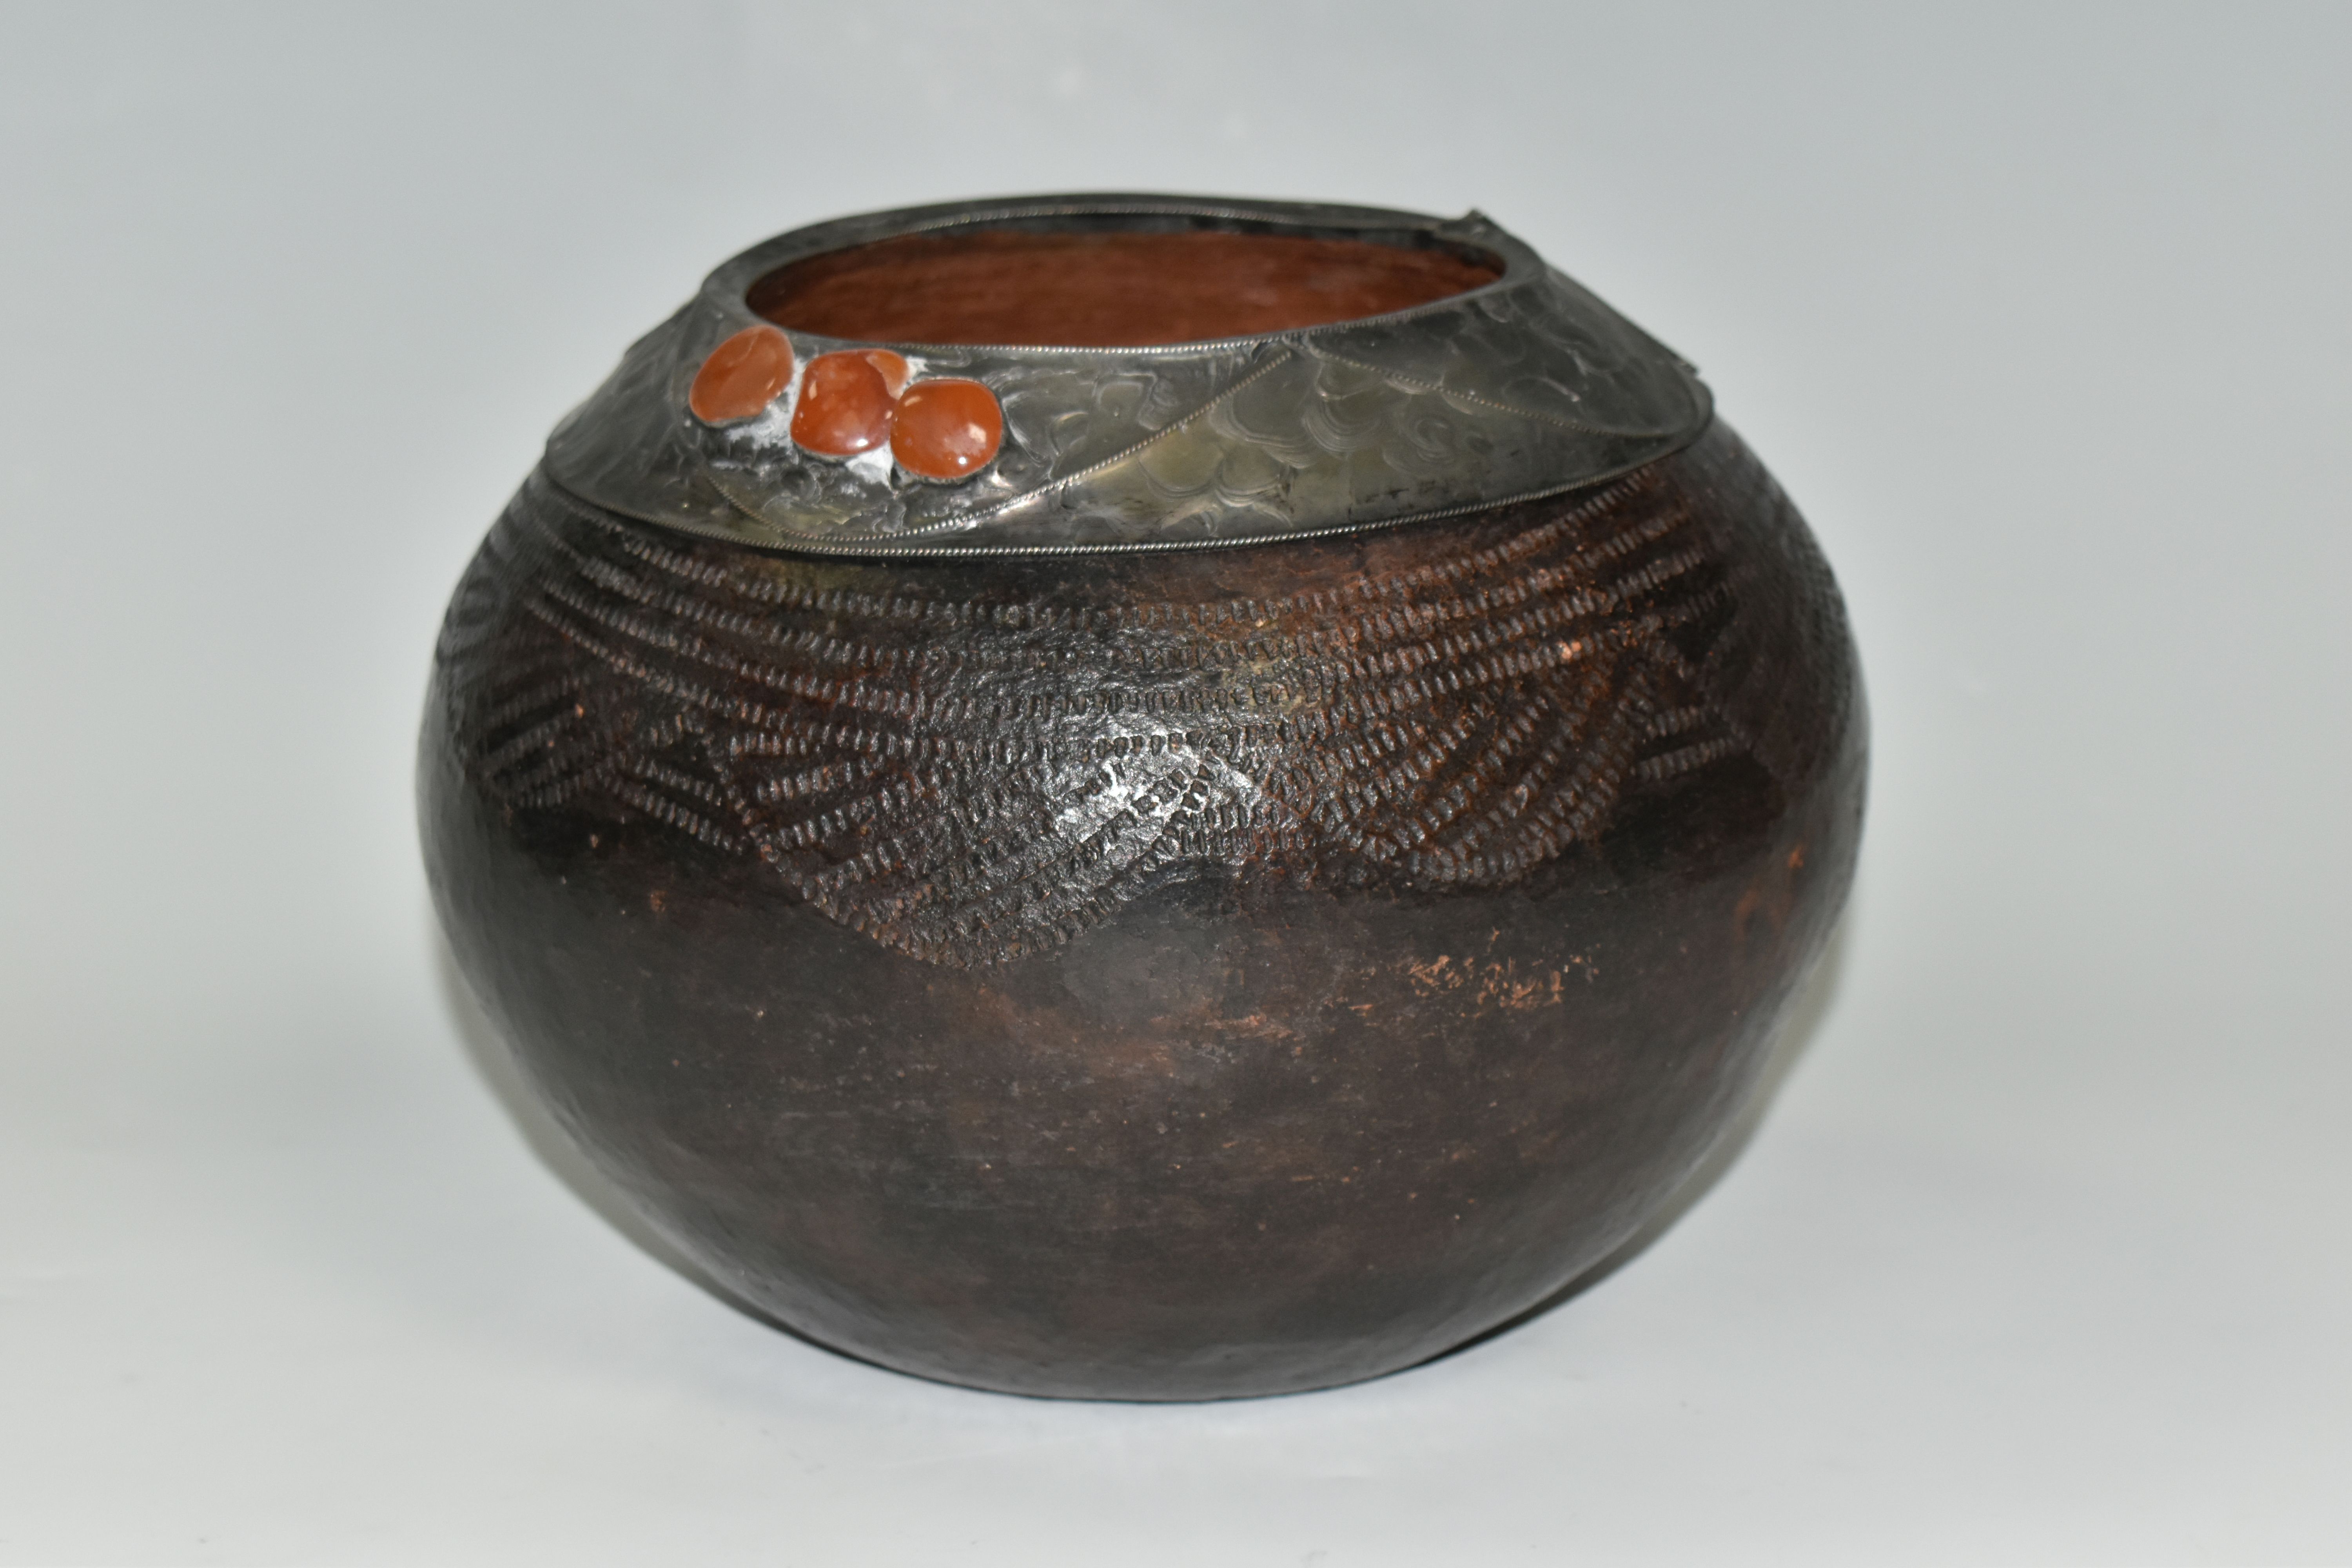 A ZULU / SOUTH AFRICAN STYLE JAR WITH PEWTER RIM, the pewter rim with beaded edges, swags and